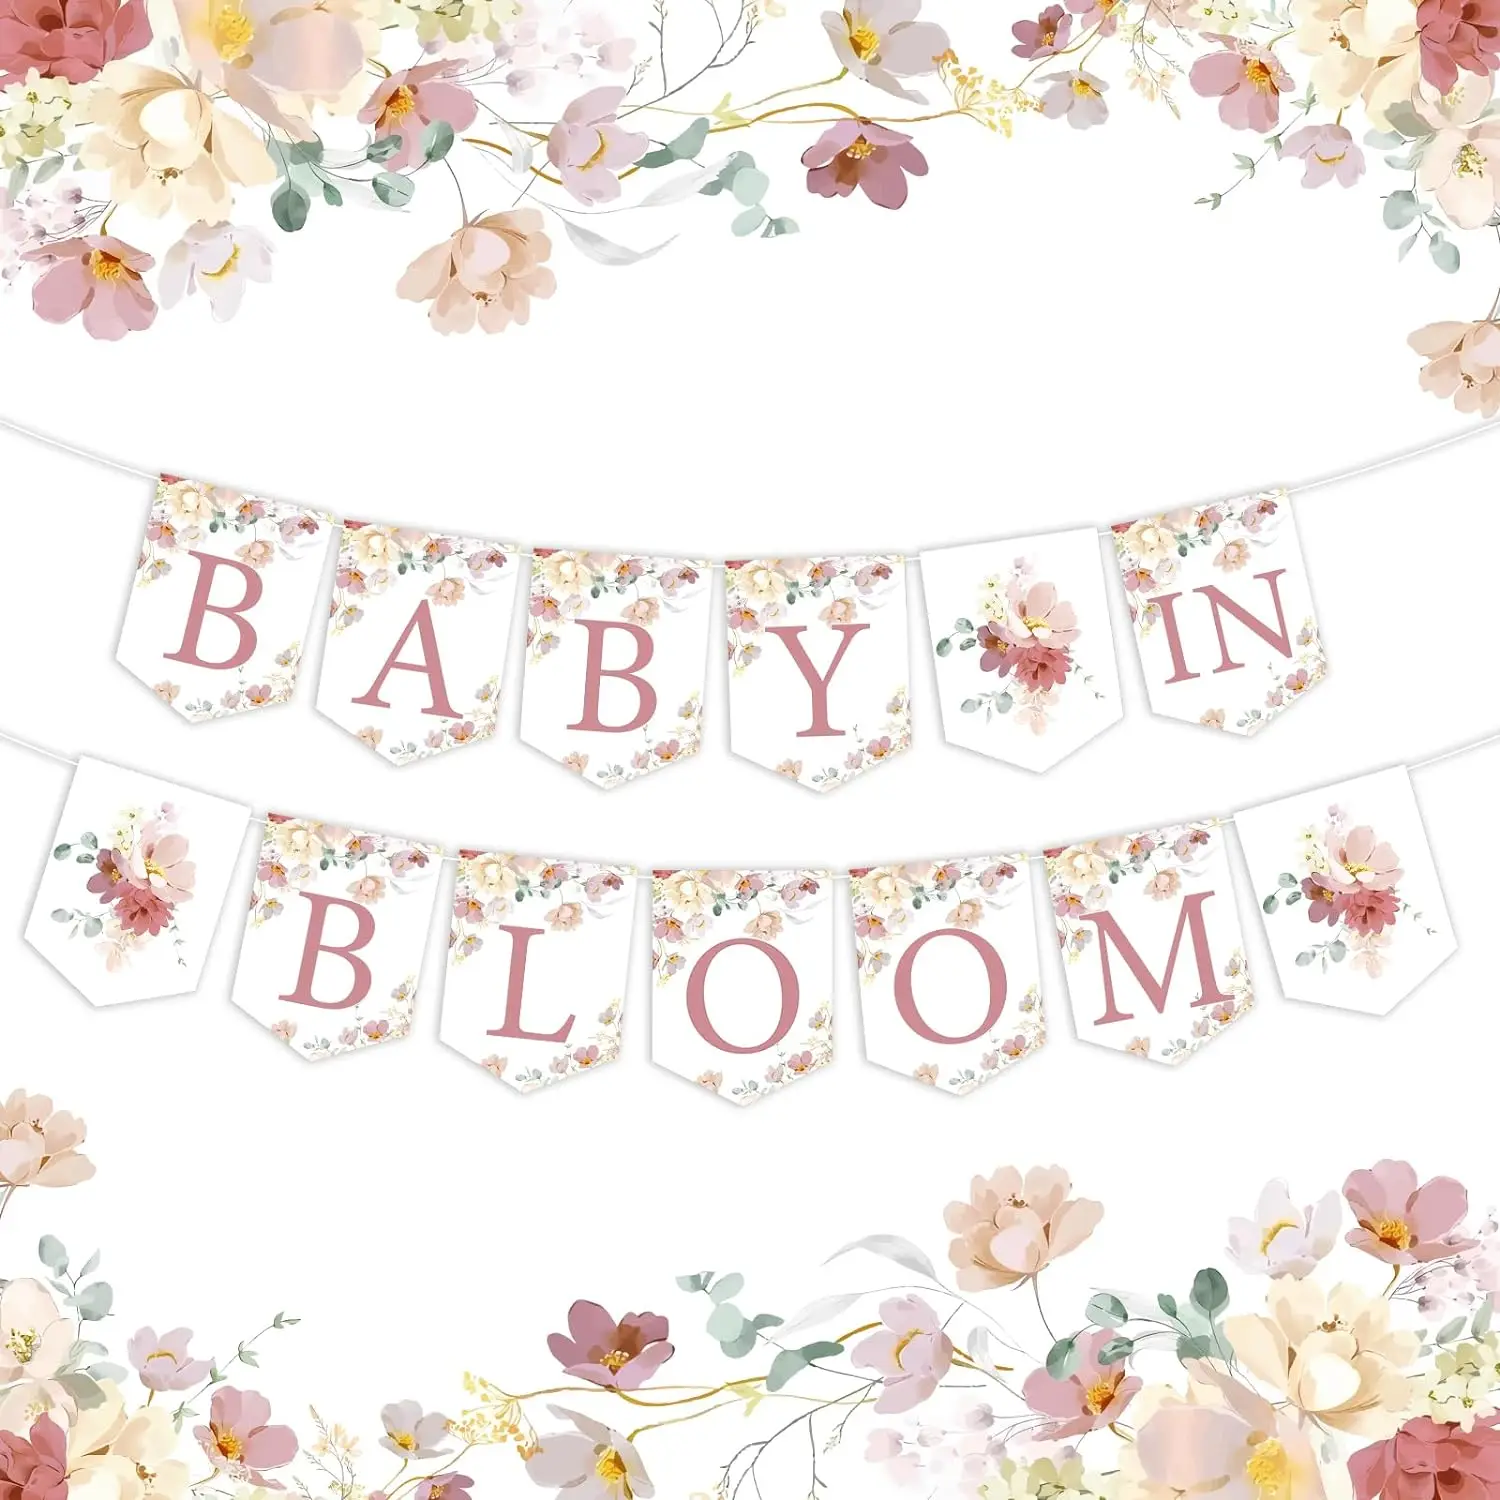 

Floral Baby in Bloom Baby Shower Decor Banner, Pre-Strung Wildflowers Boho Gender Reveal Birthday Party Supplies